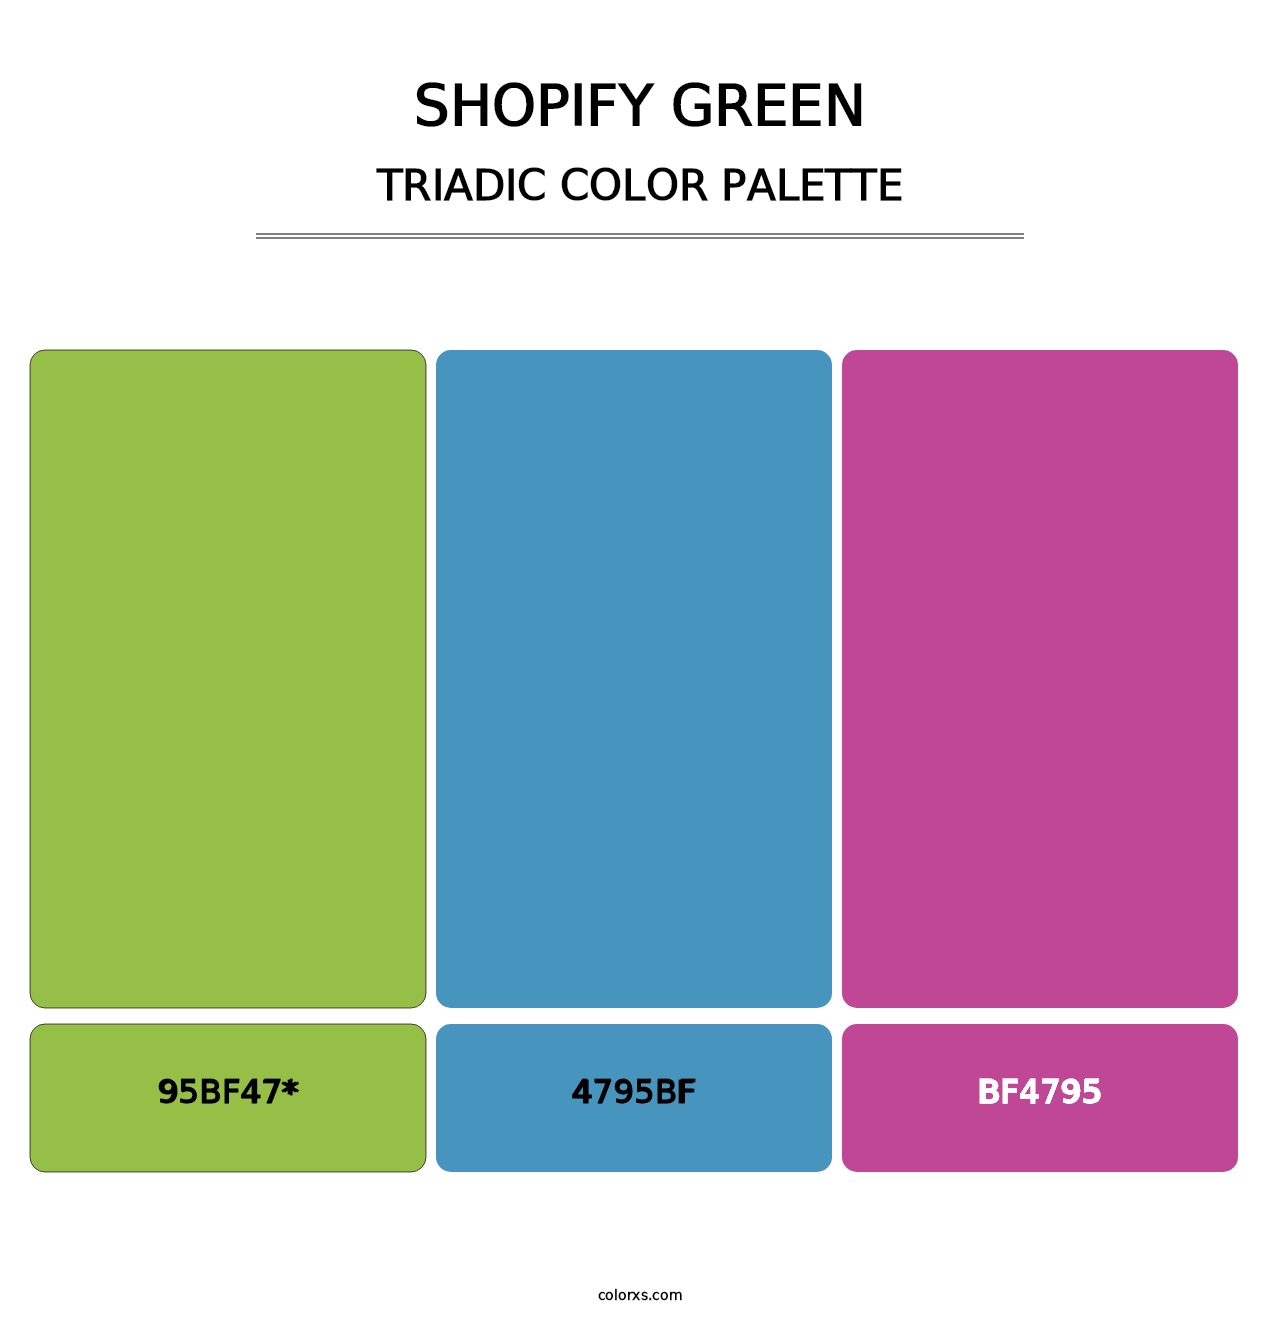 Shopify Green - Triadic Color Palette